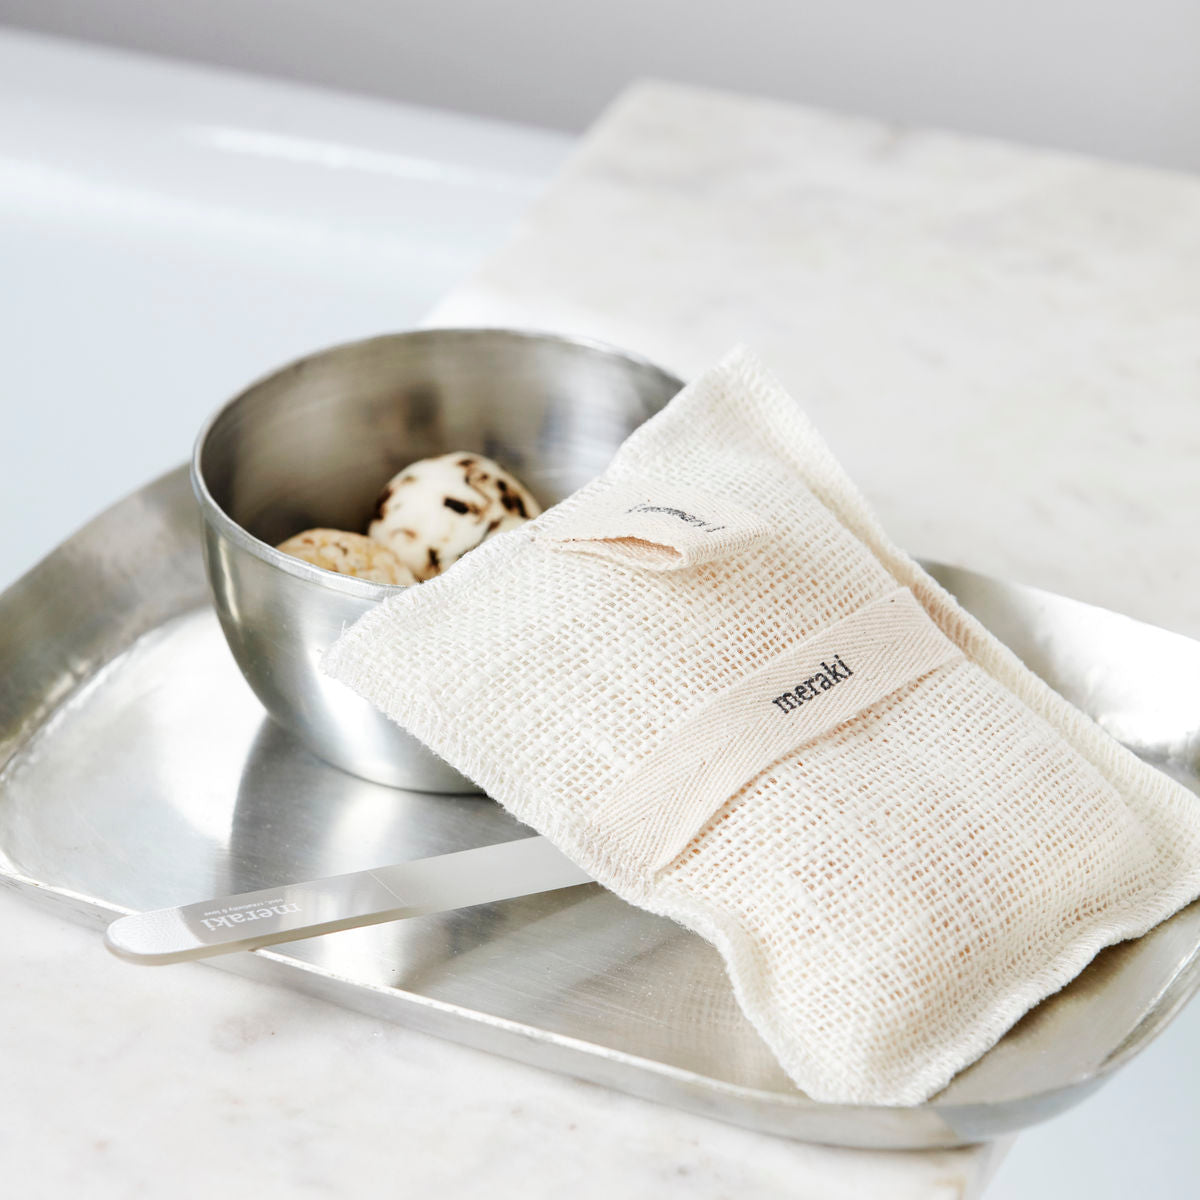 Load image into Gallery viewer, Bath mitt - Rosemary - 140 g.
